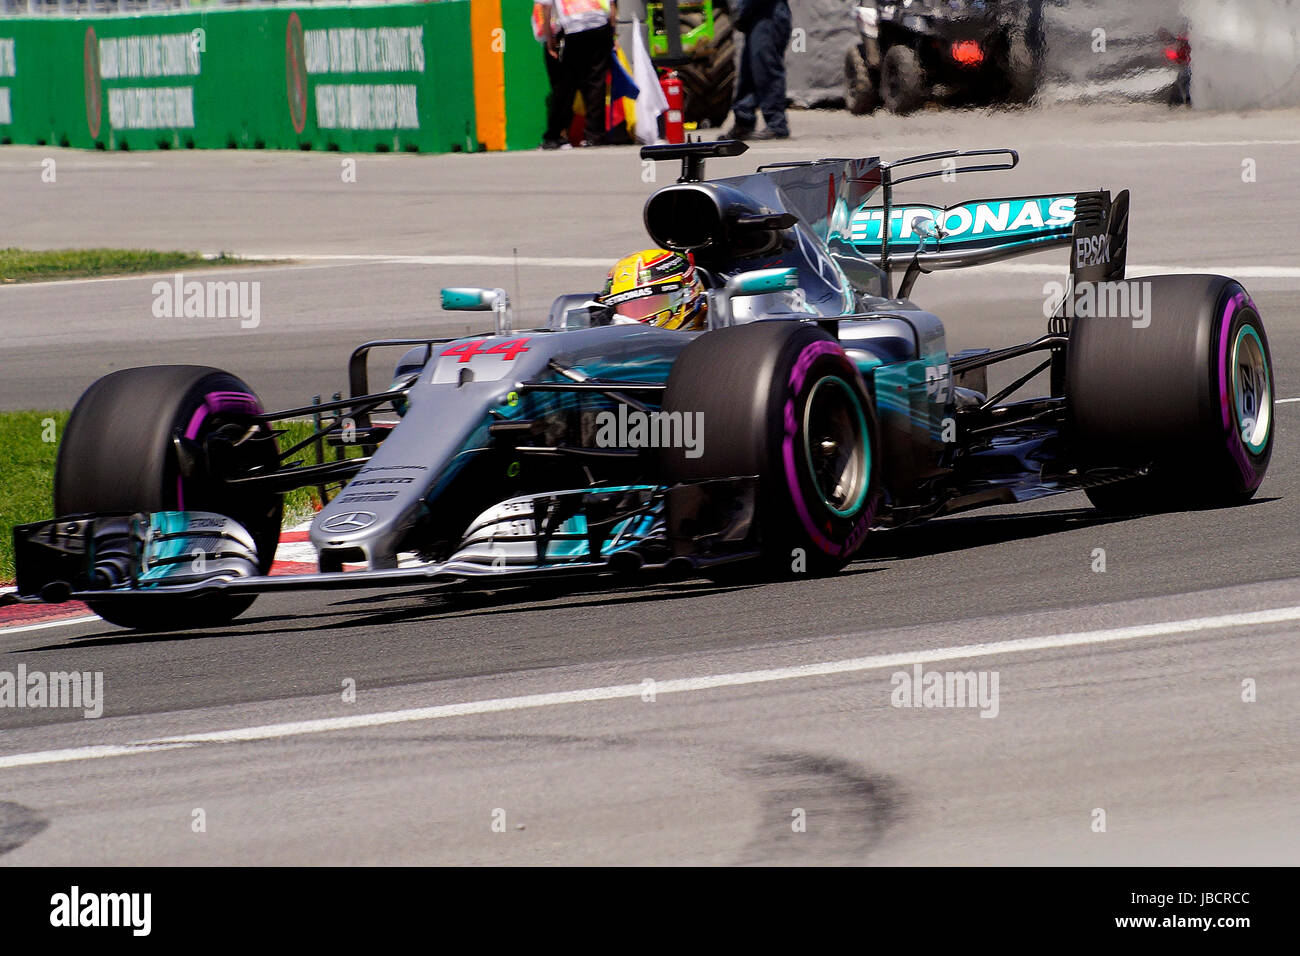 Montreal, Canada. 10th June, 2017. Formula One driver Lewis Hamilton during a qualifing lap at the Montreal Grand Prix. Credit: Mario Beauregard/Alamy Live News Stock Photo